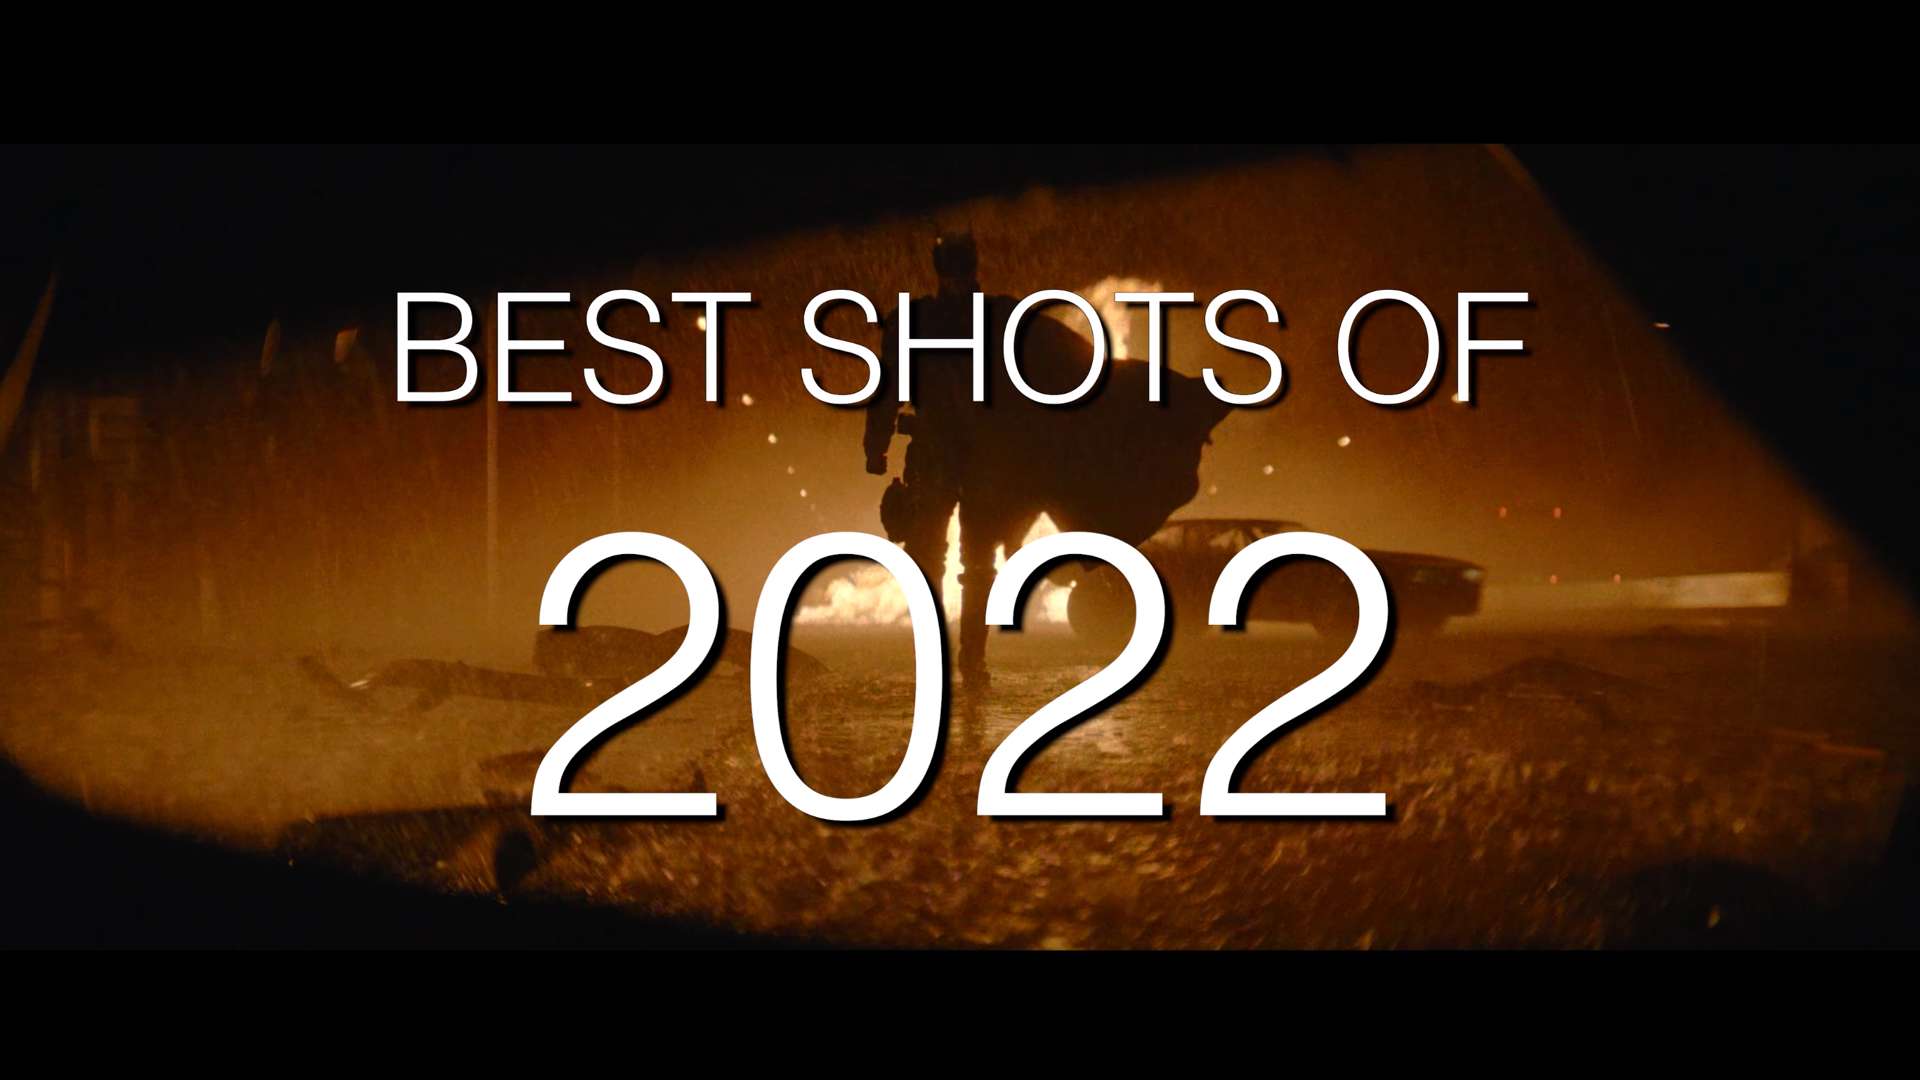 The Best Shots of 2022